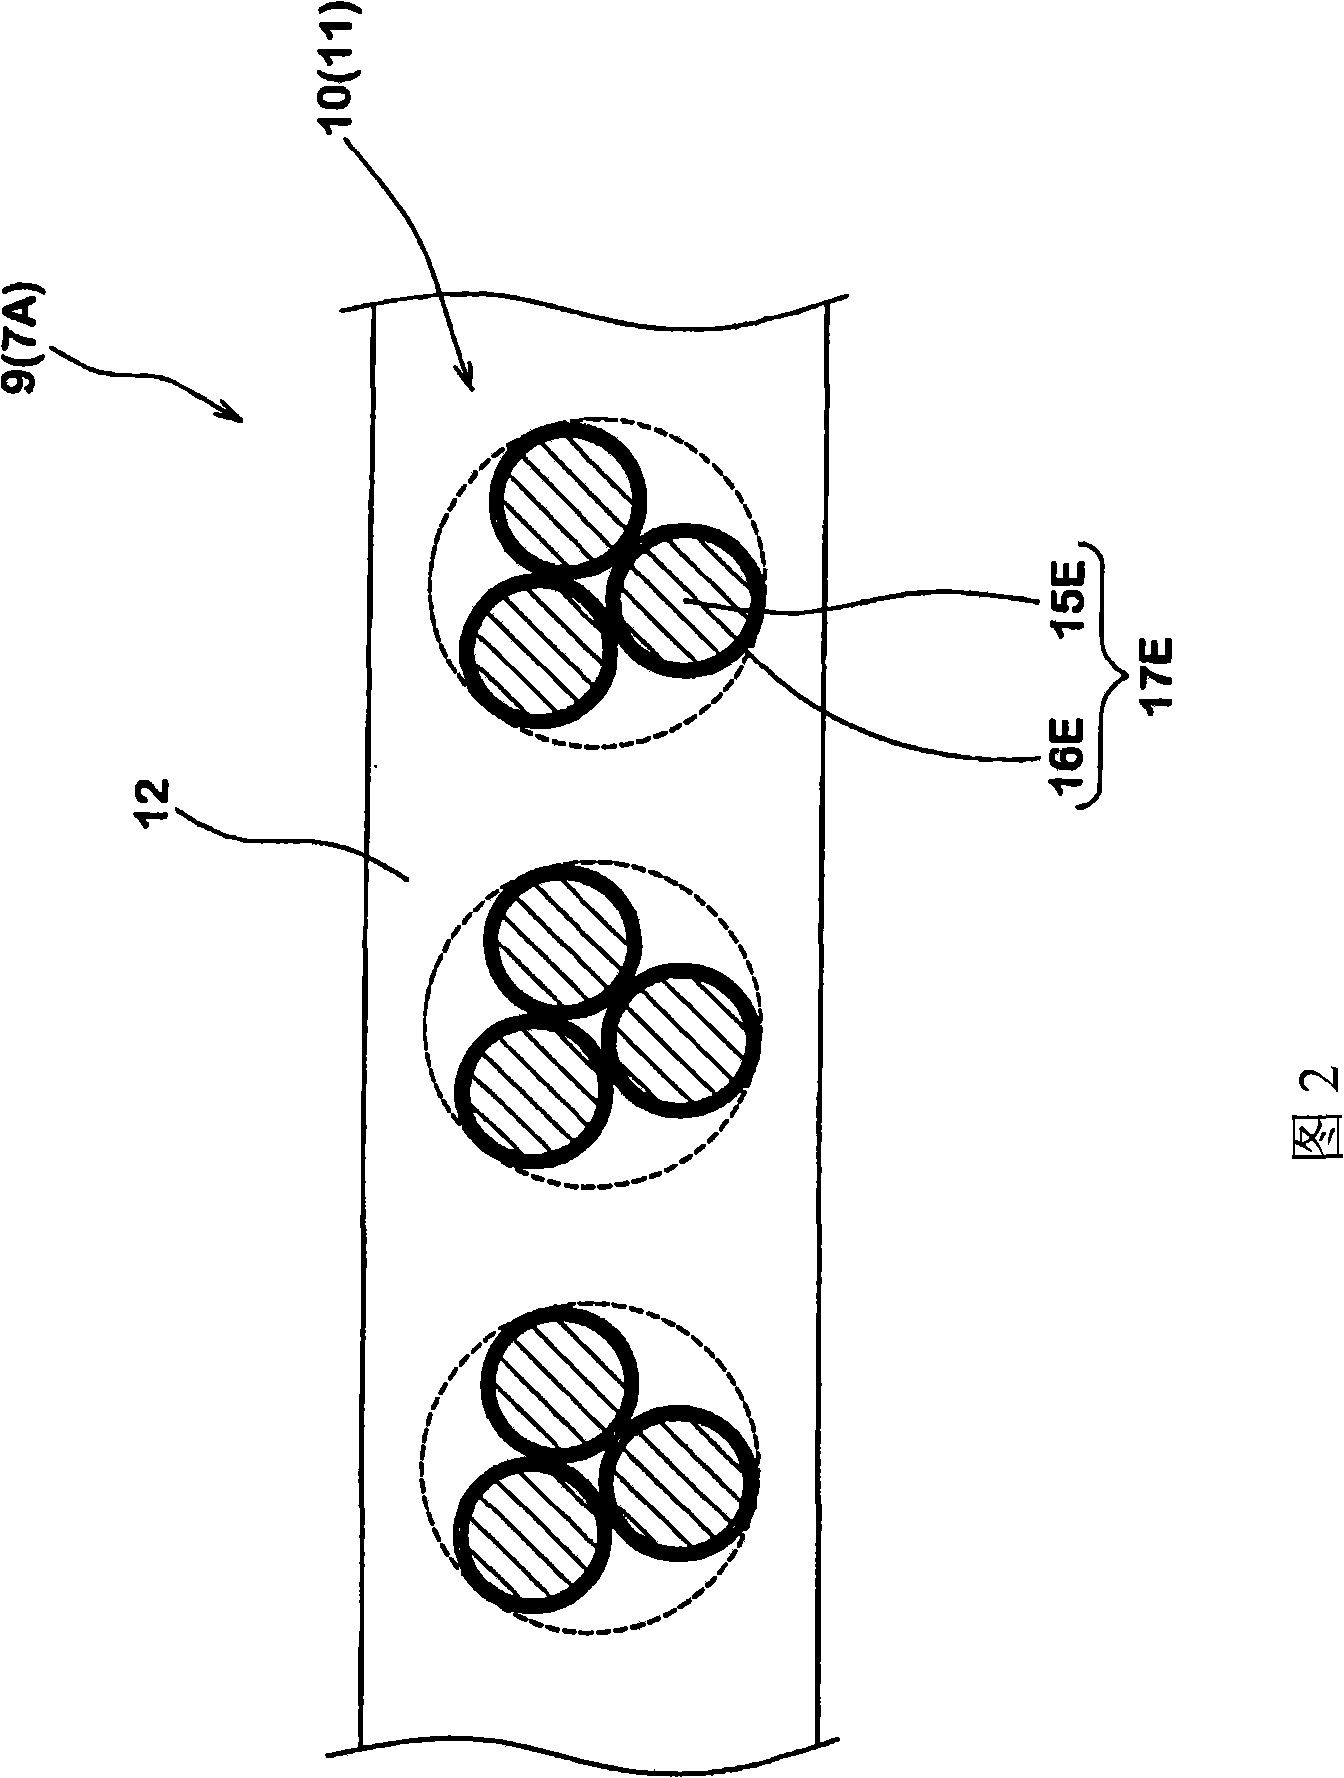 Metallic cord, rubber/cord composite object, and pneumatic tire obtained using the same